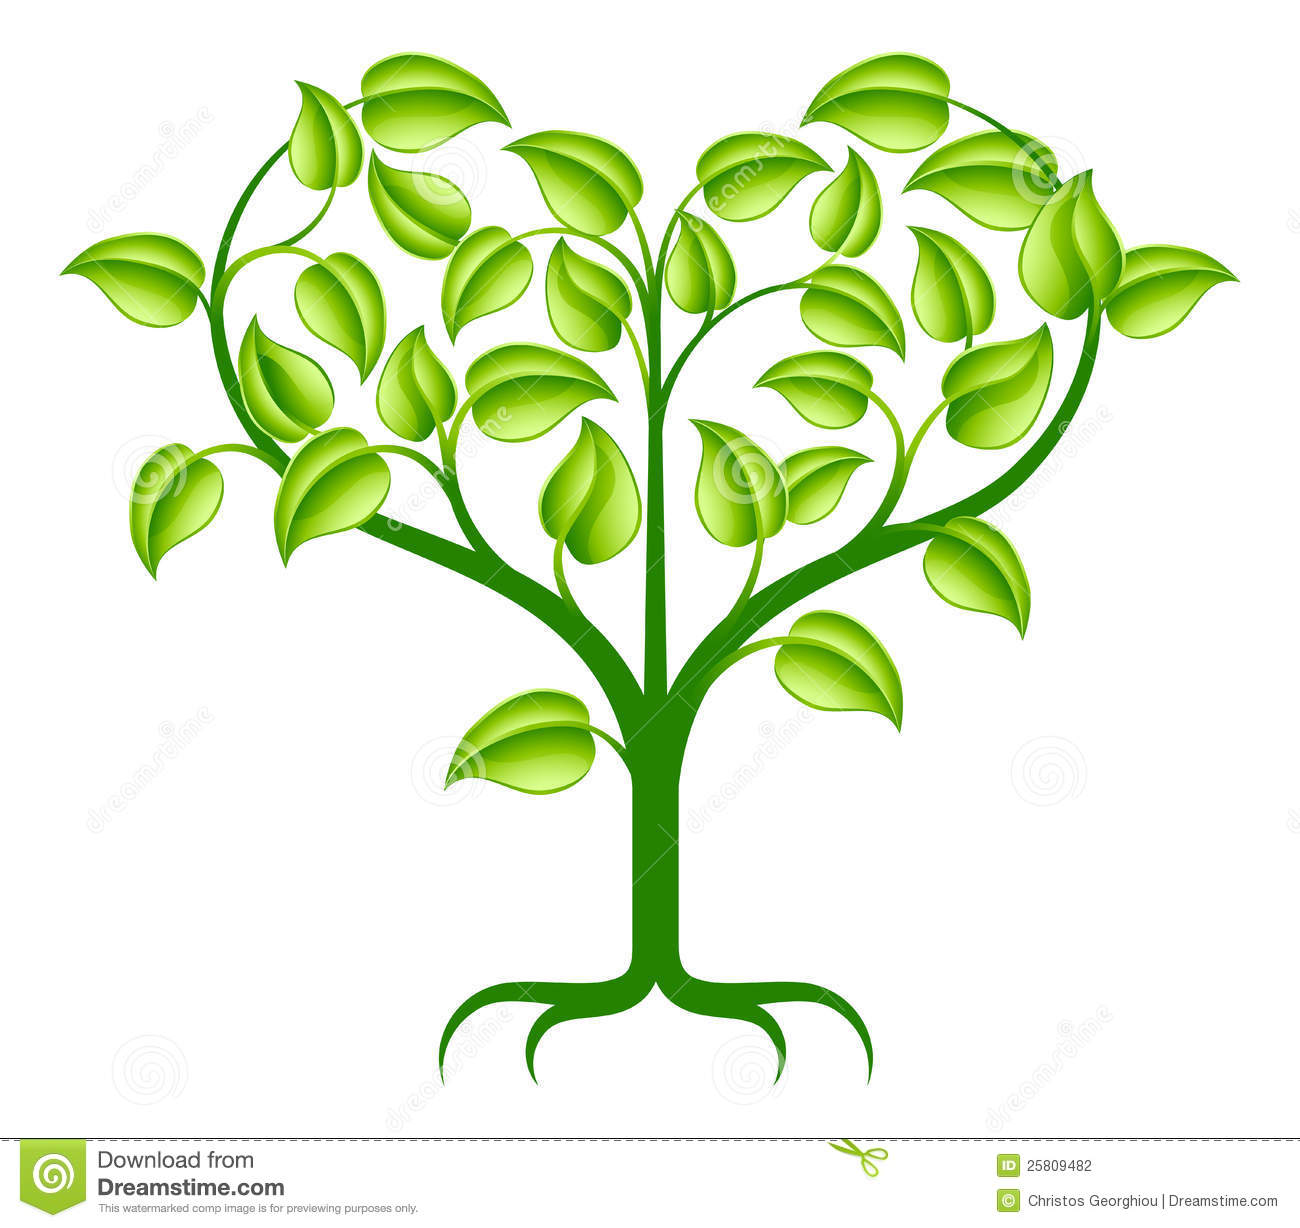 Abstract Tree Illustration With Branches Growing Into A Heart Shape